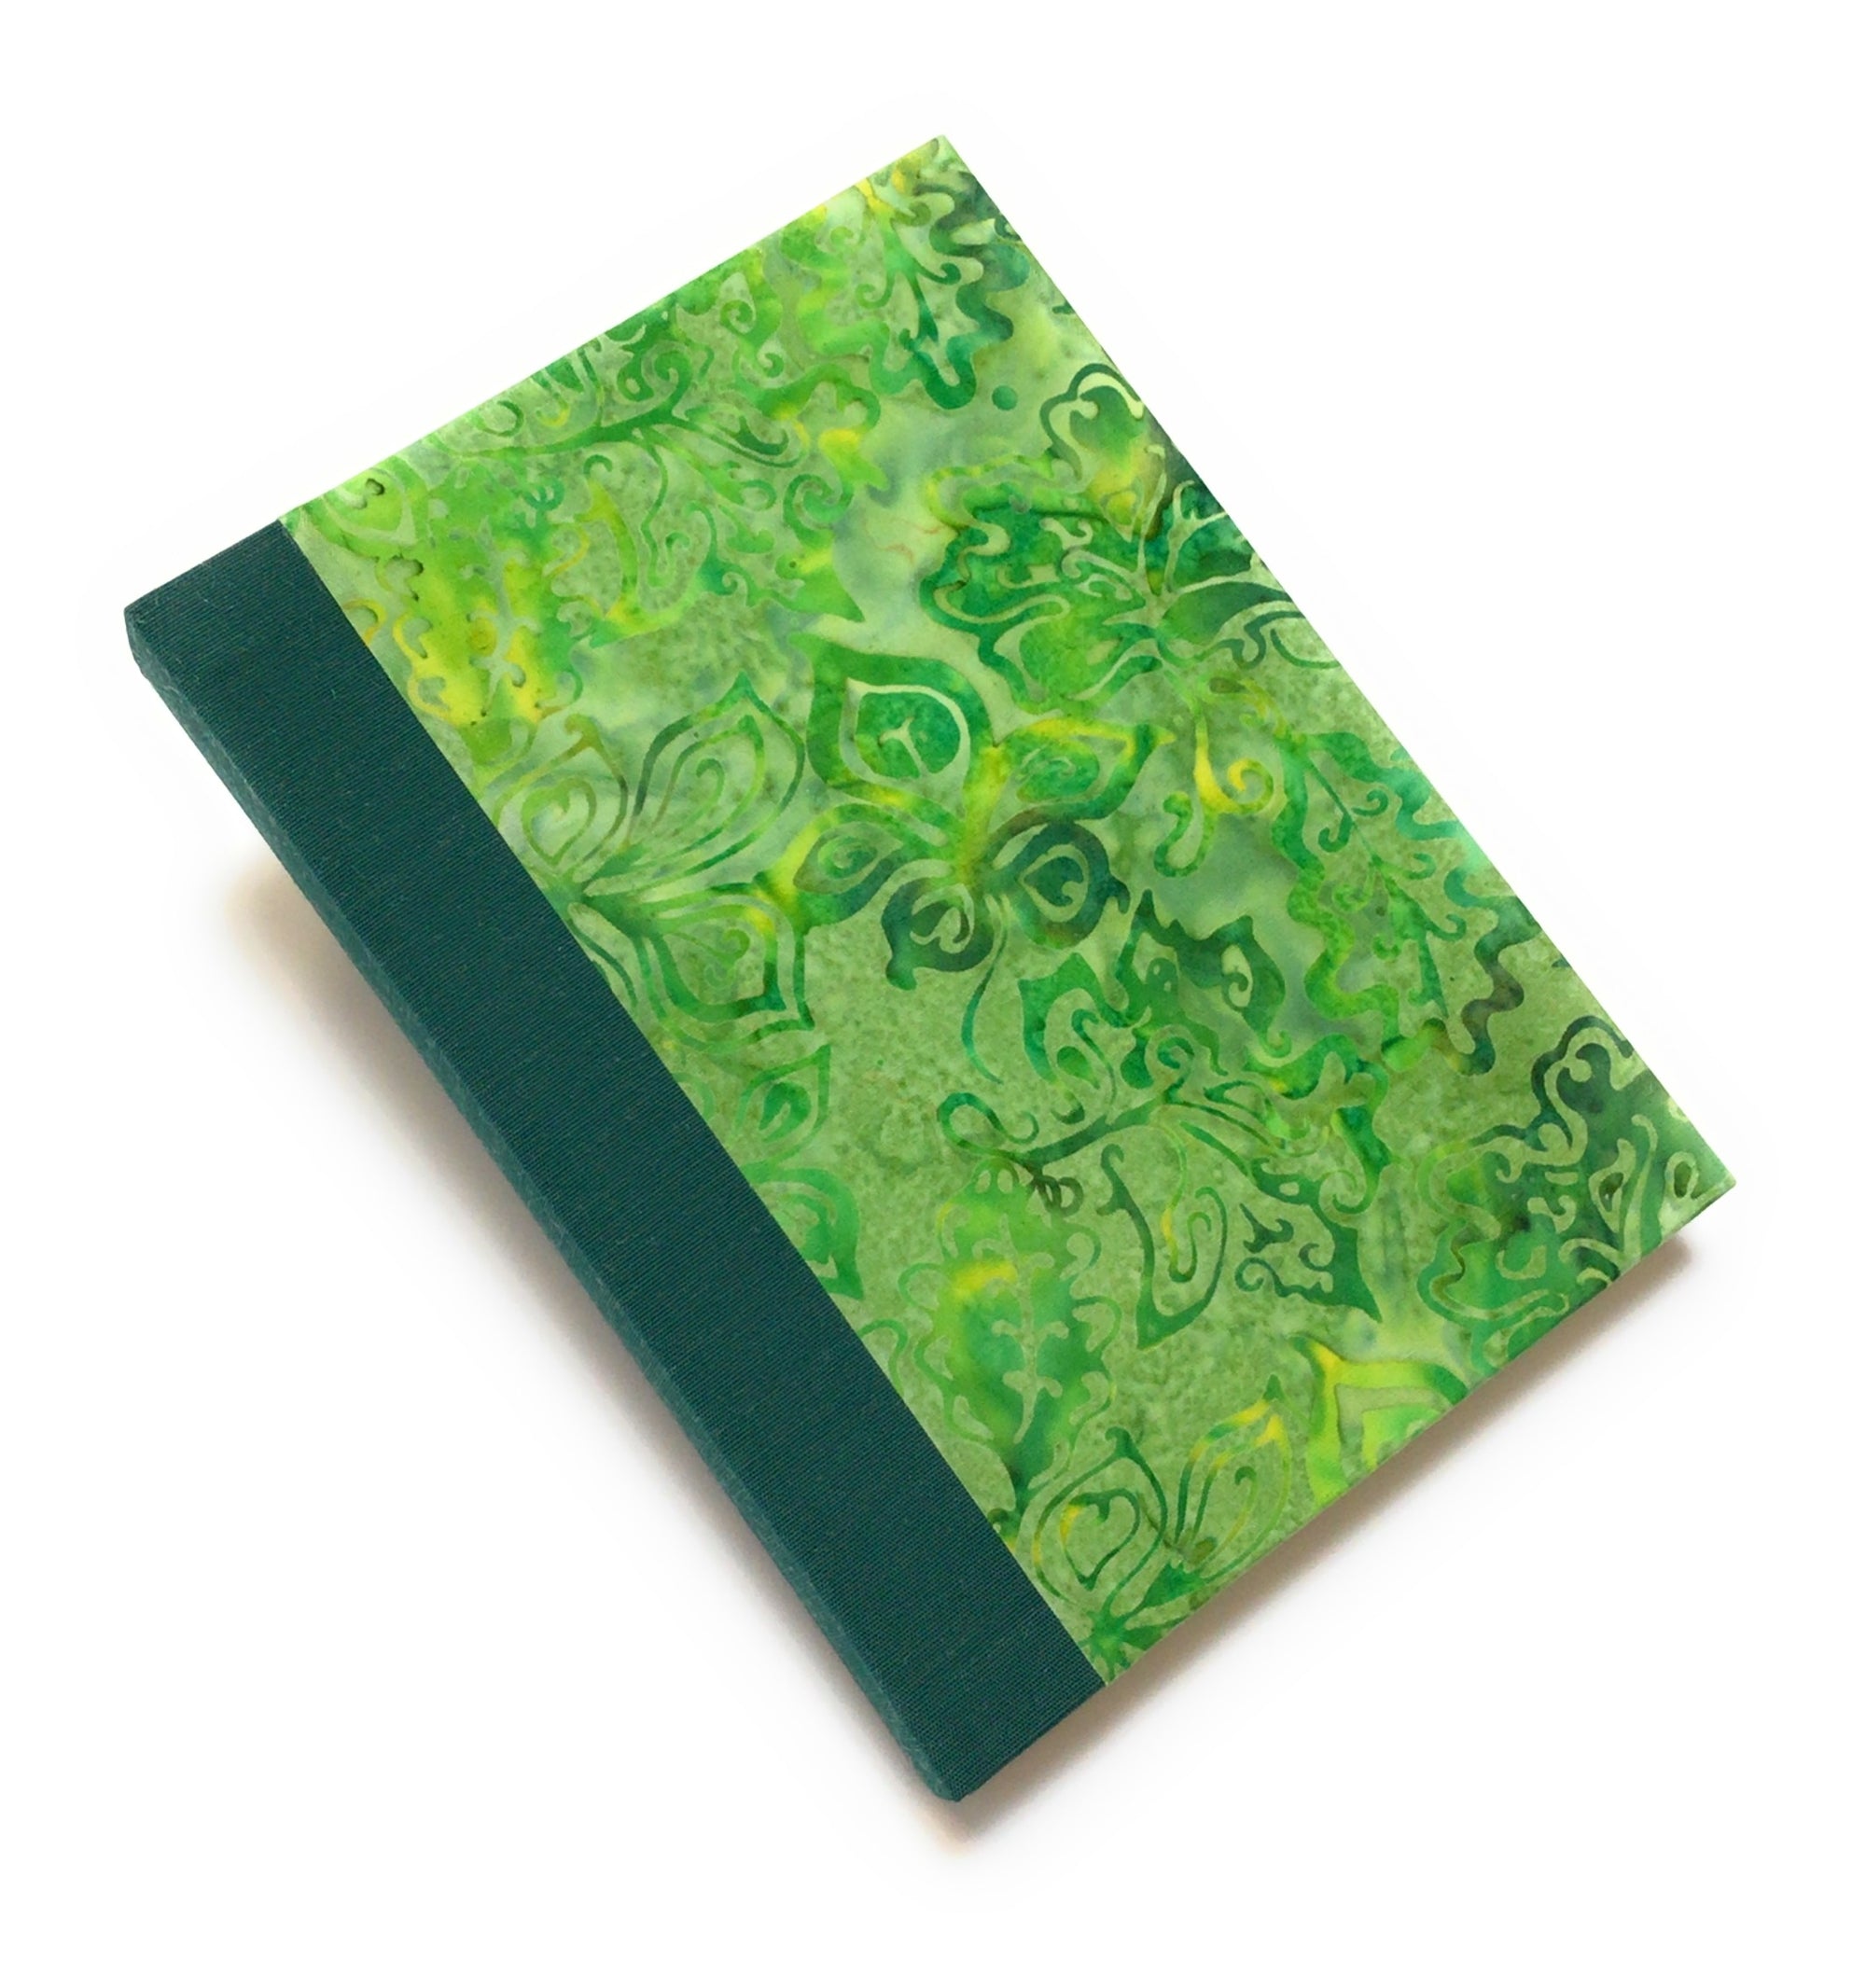 Yellow green tropical flower patterned batik covers. Green Japanese bookcloth spine. 200 blank pages both sides. 5 x 7.